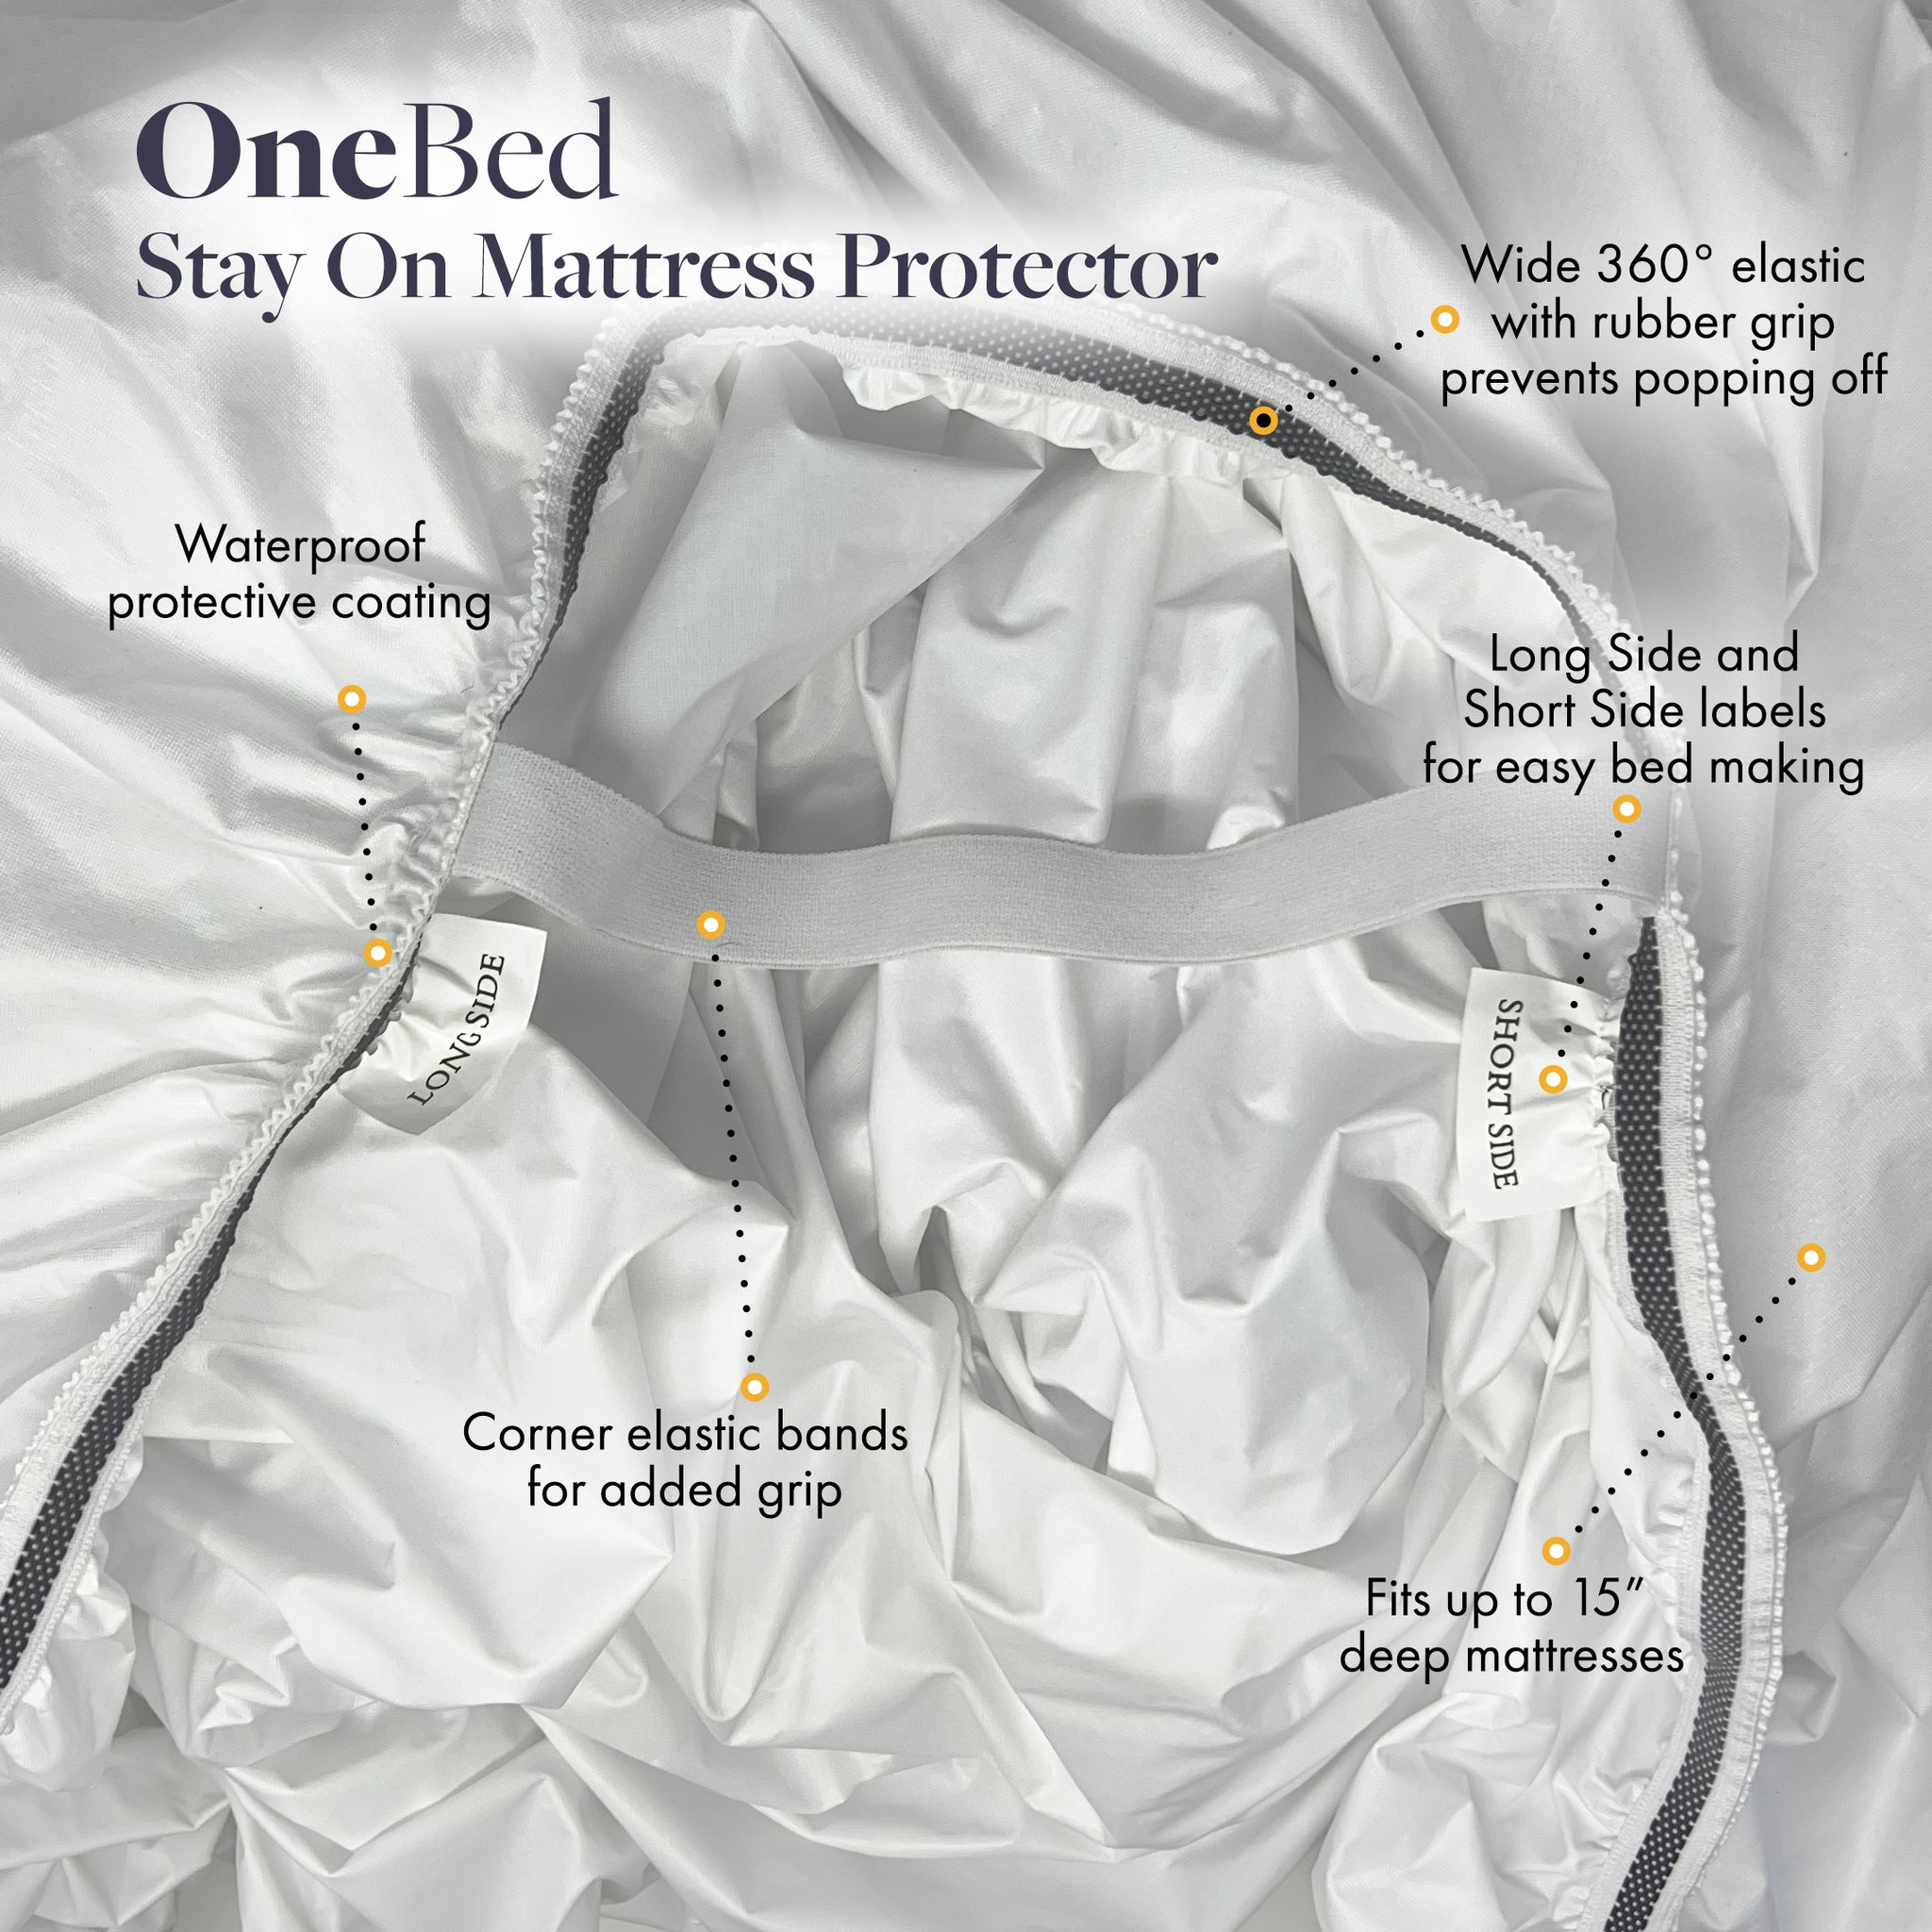 One Bed Mattress Protector Components with Captions